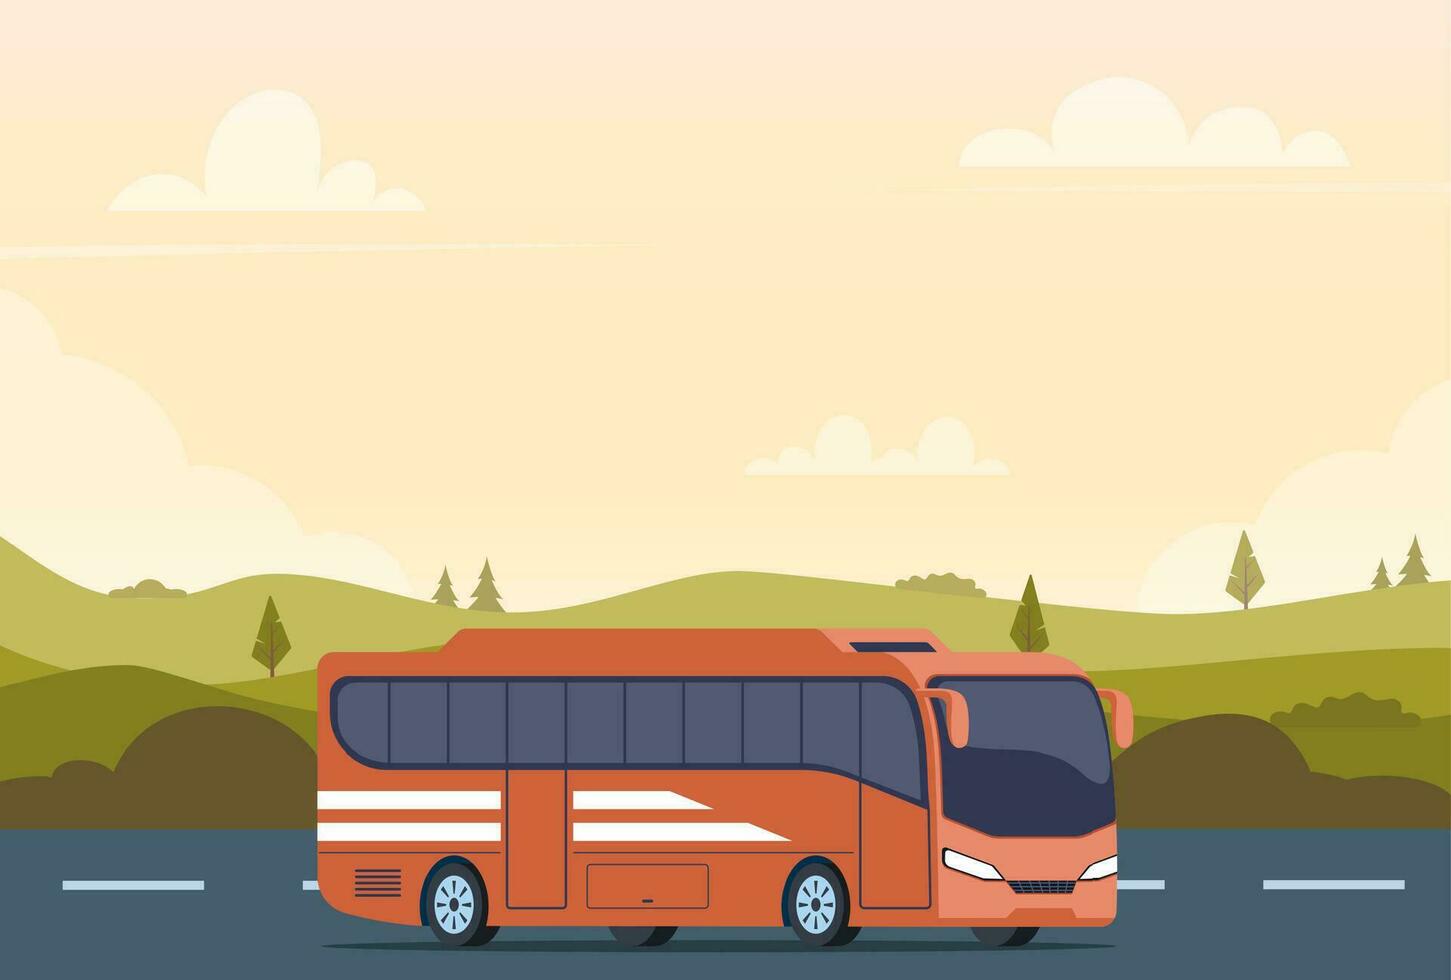 Traveling by bus. Tourist buses drive along road towards trip adventure. Travel agency commercial advertising, summer vacation tourism background. Vector illustration.